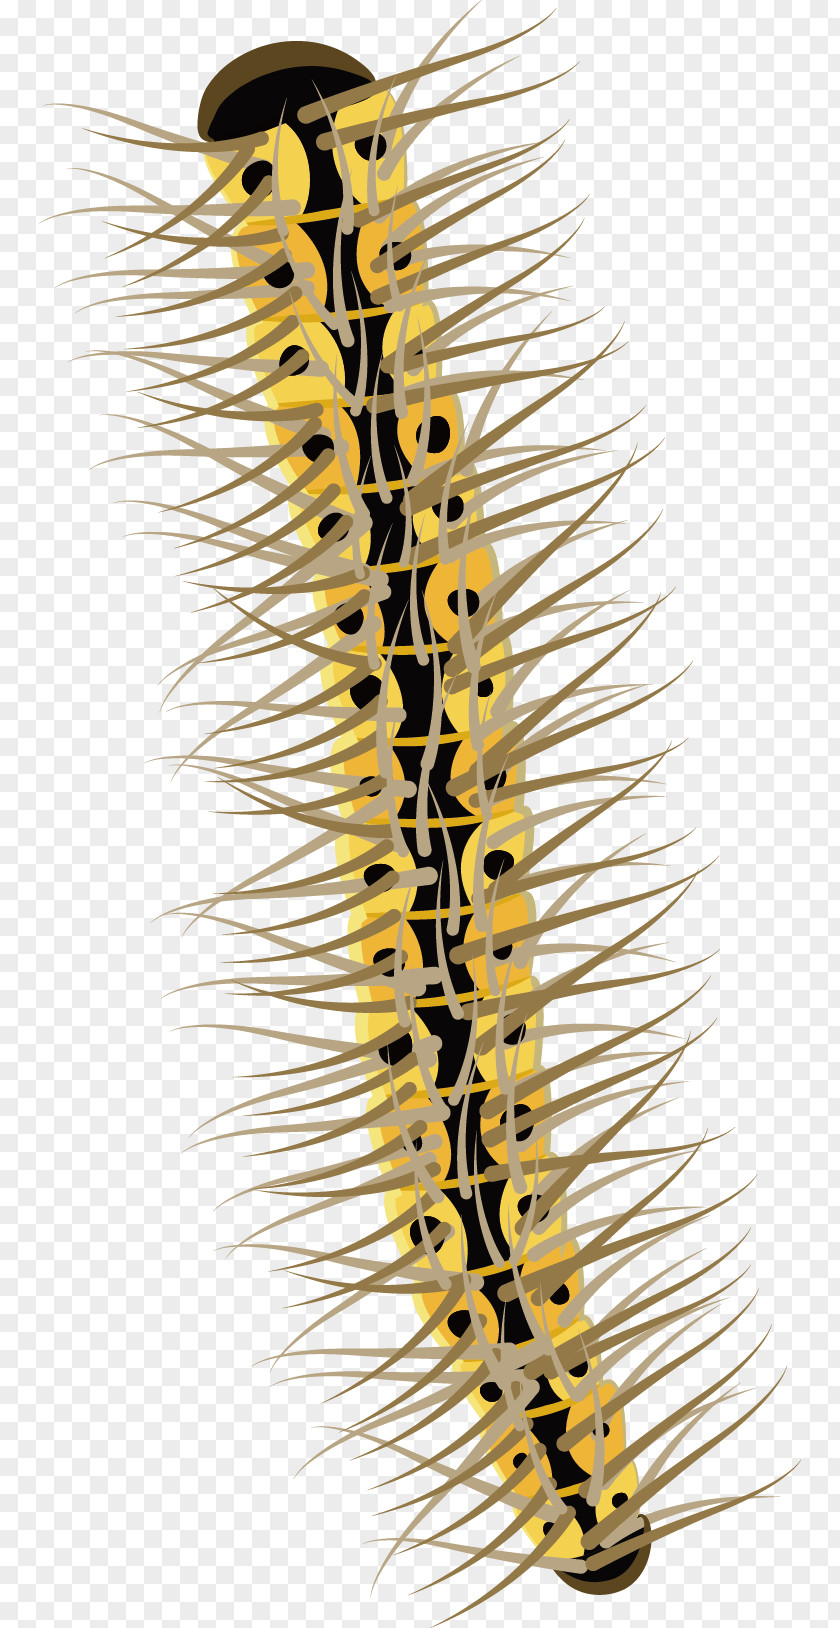 Caterpillar Vector Insect PNG